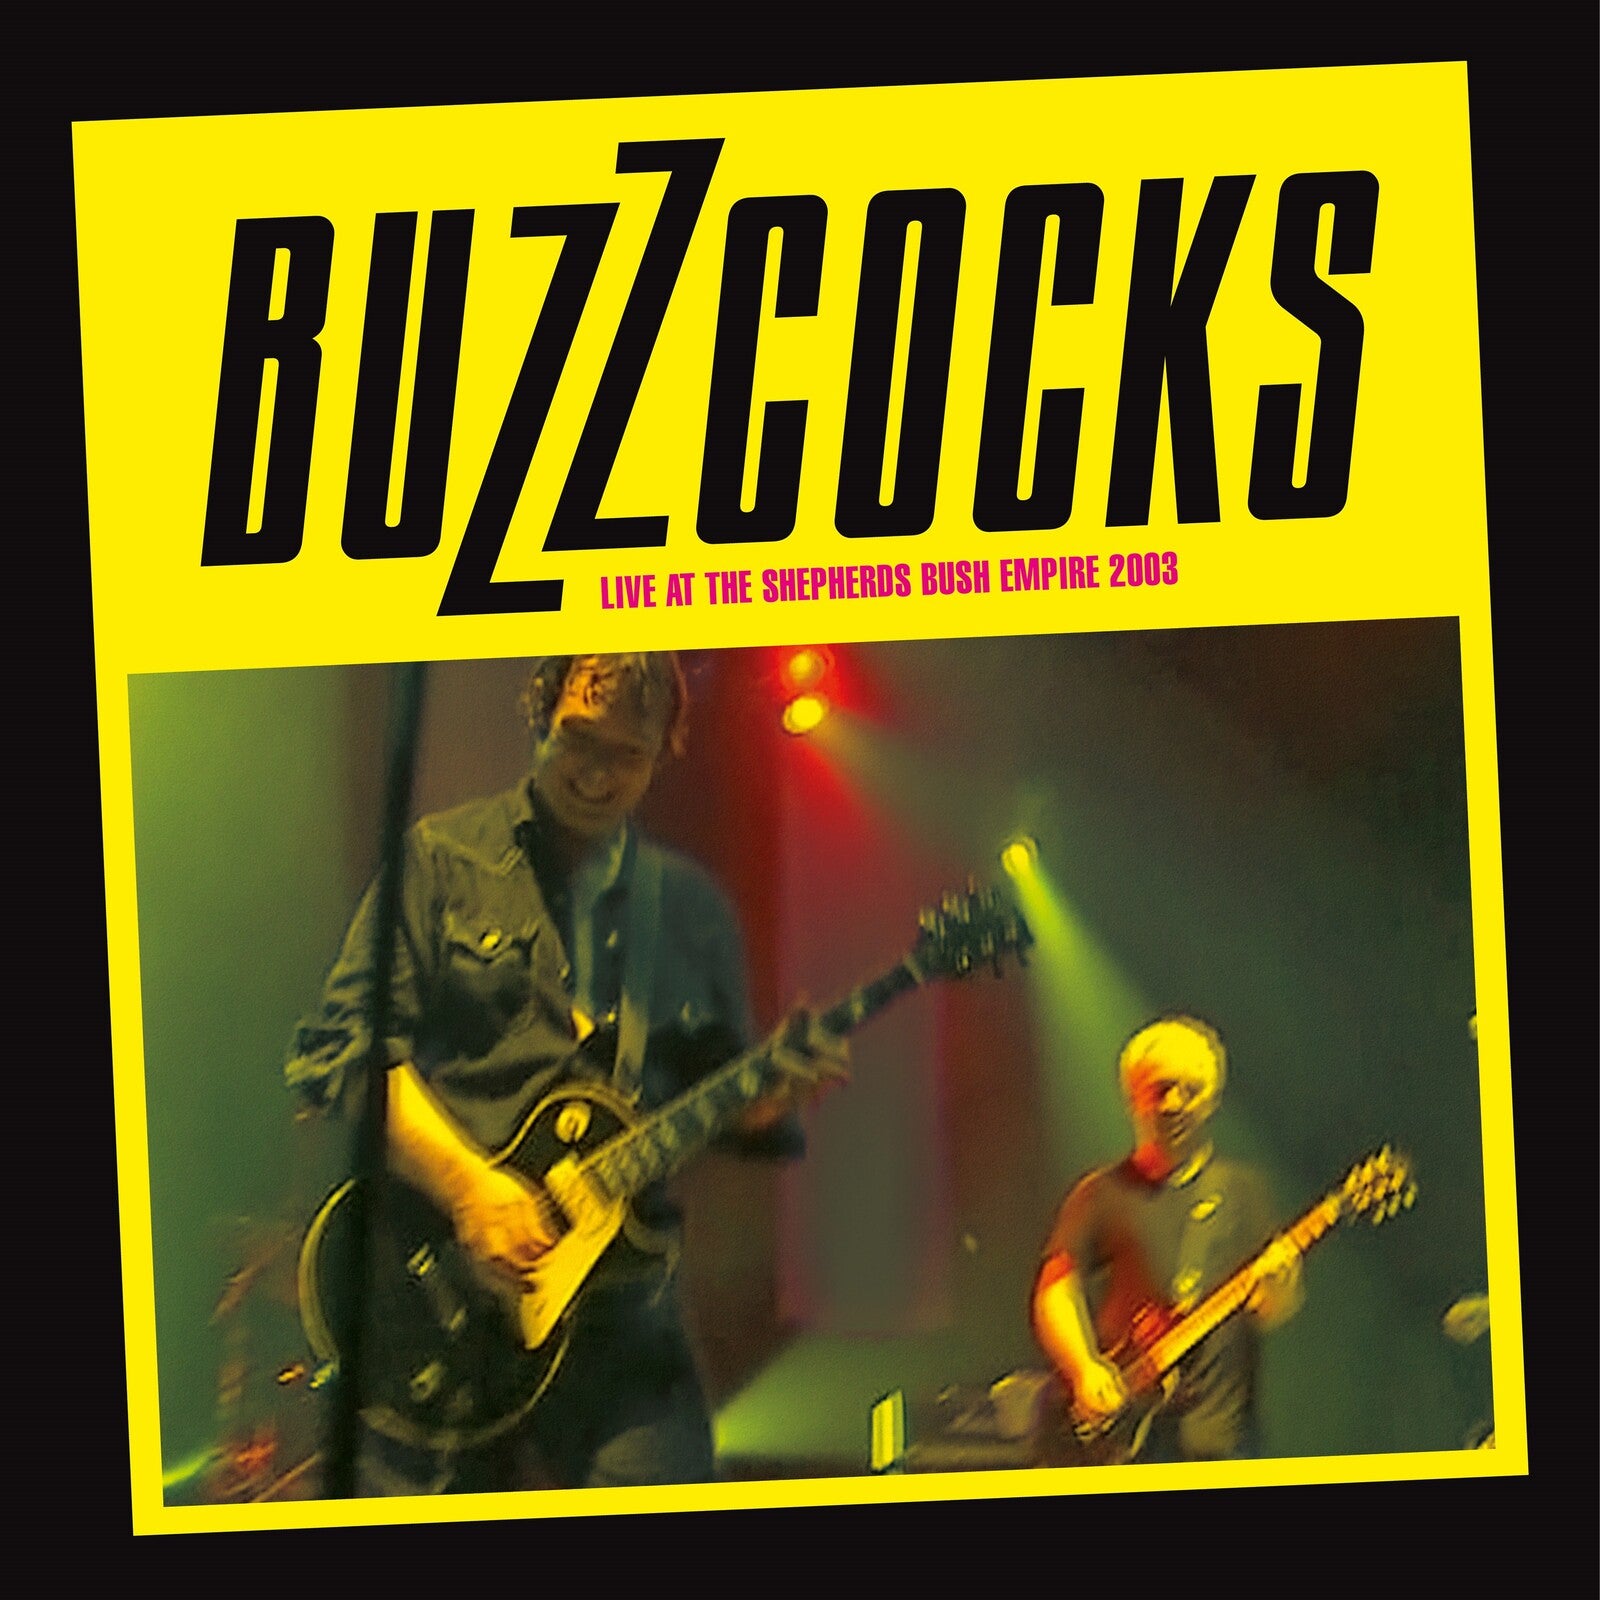 Buzzcocks: Live at The Shepherds Empire – Proper Music